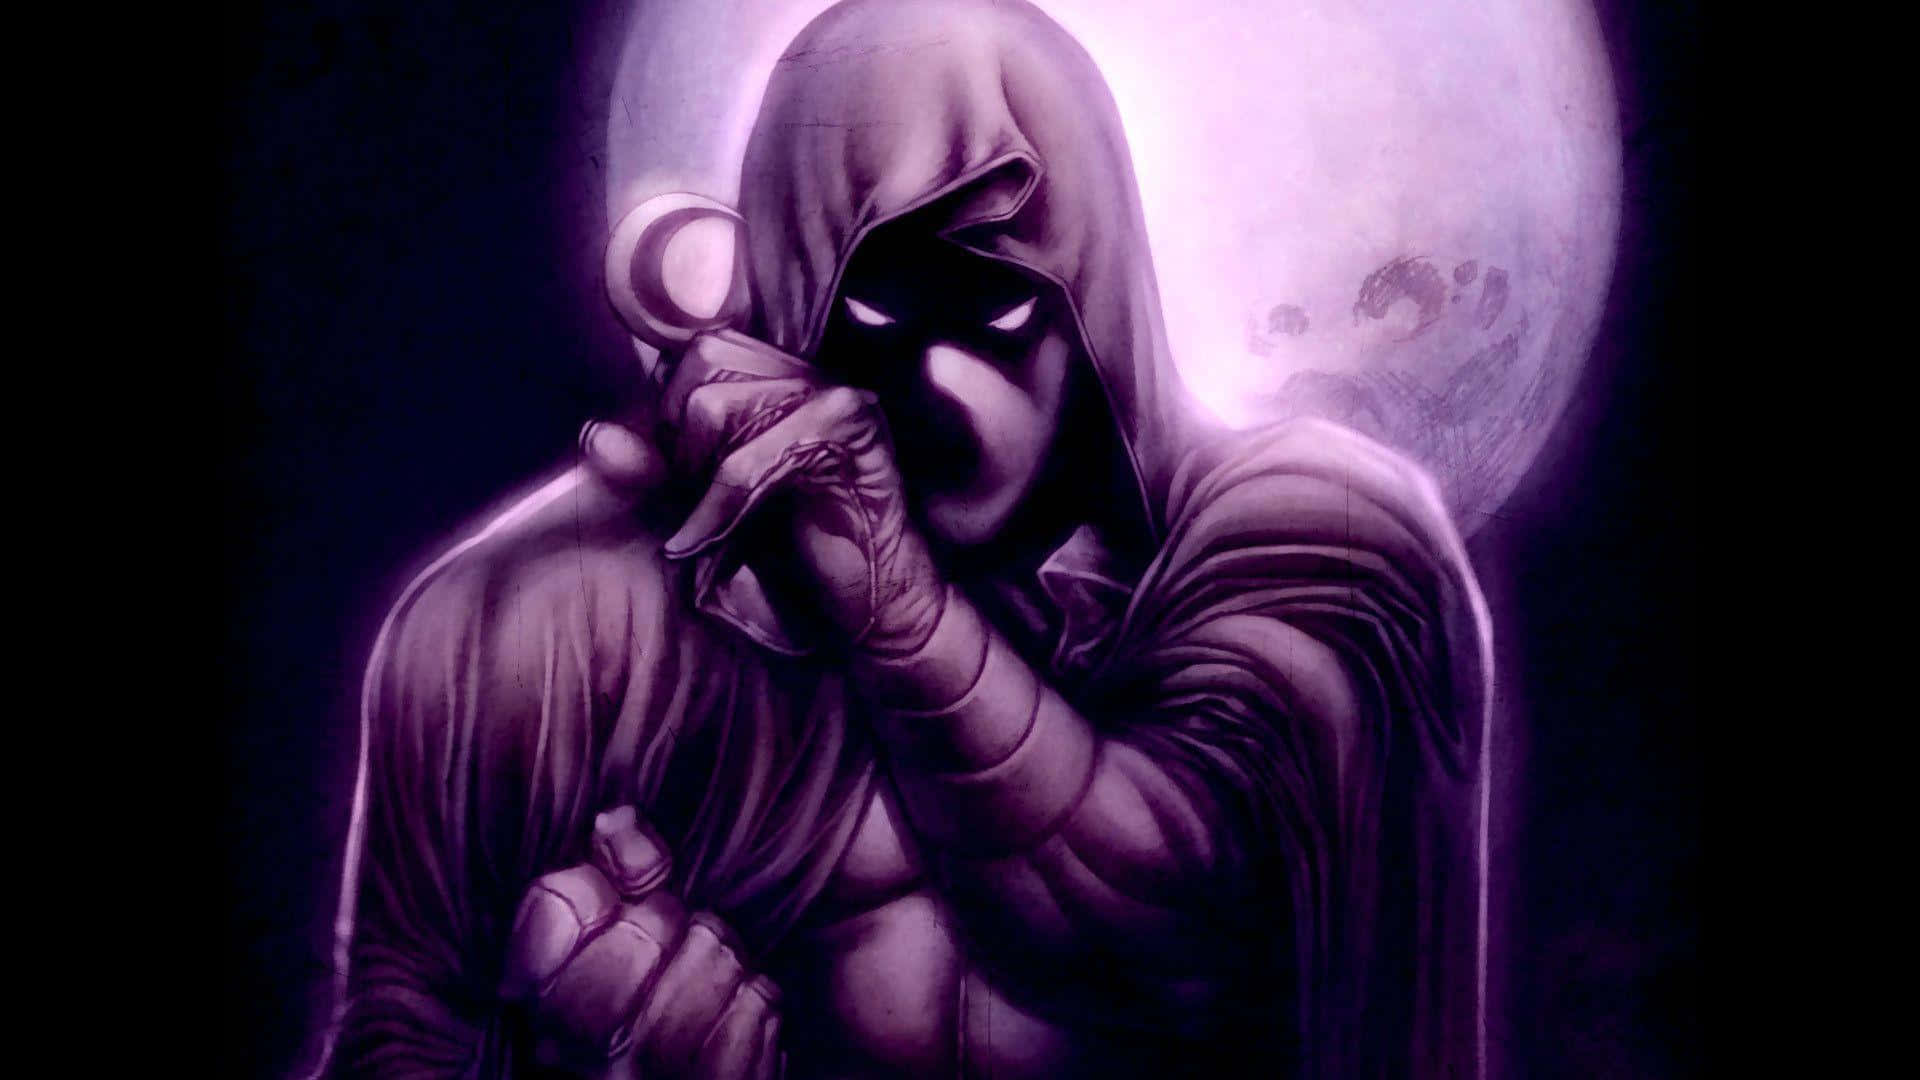 The Moon Knight stands guard against the night Wallpaper